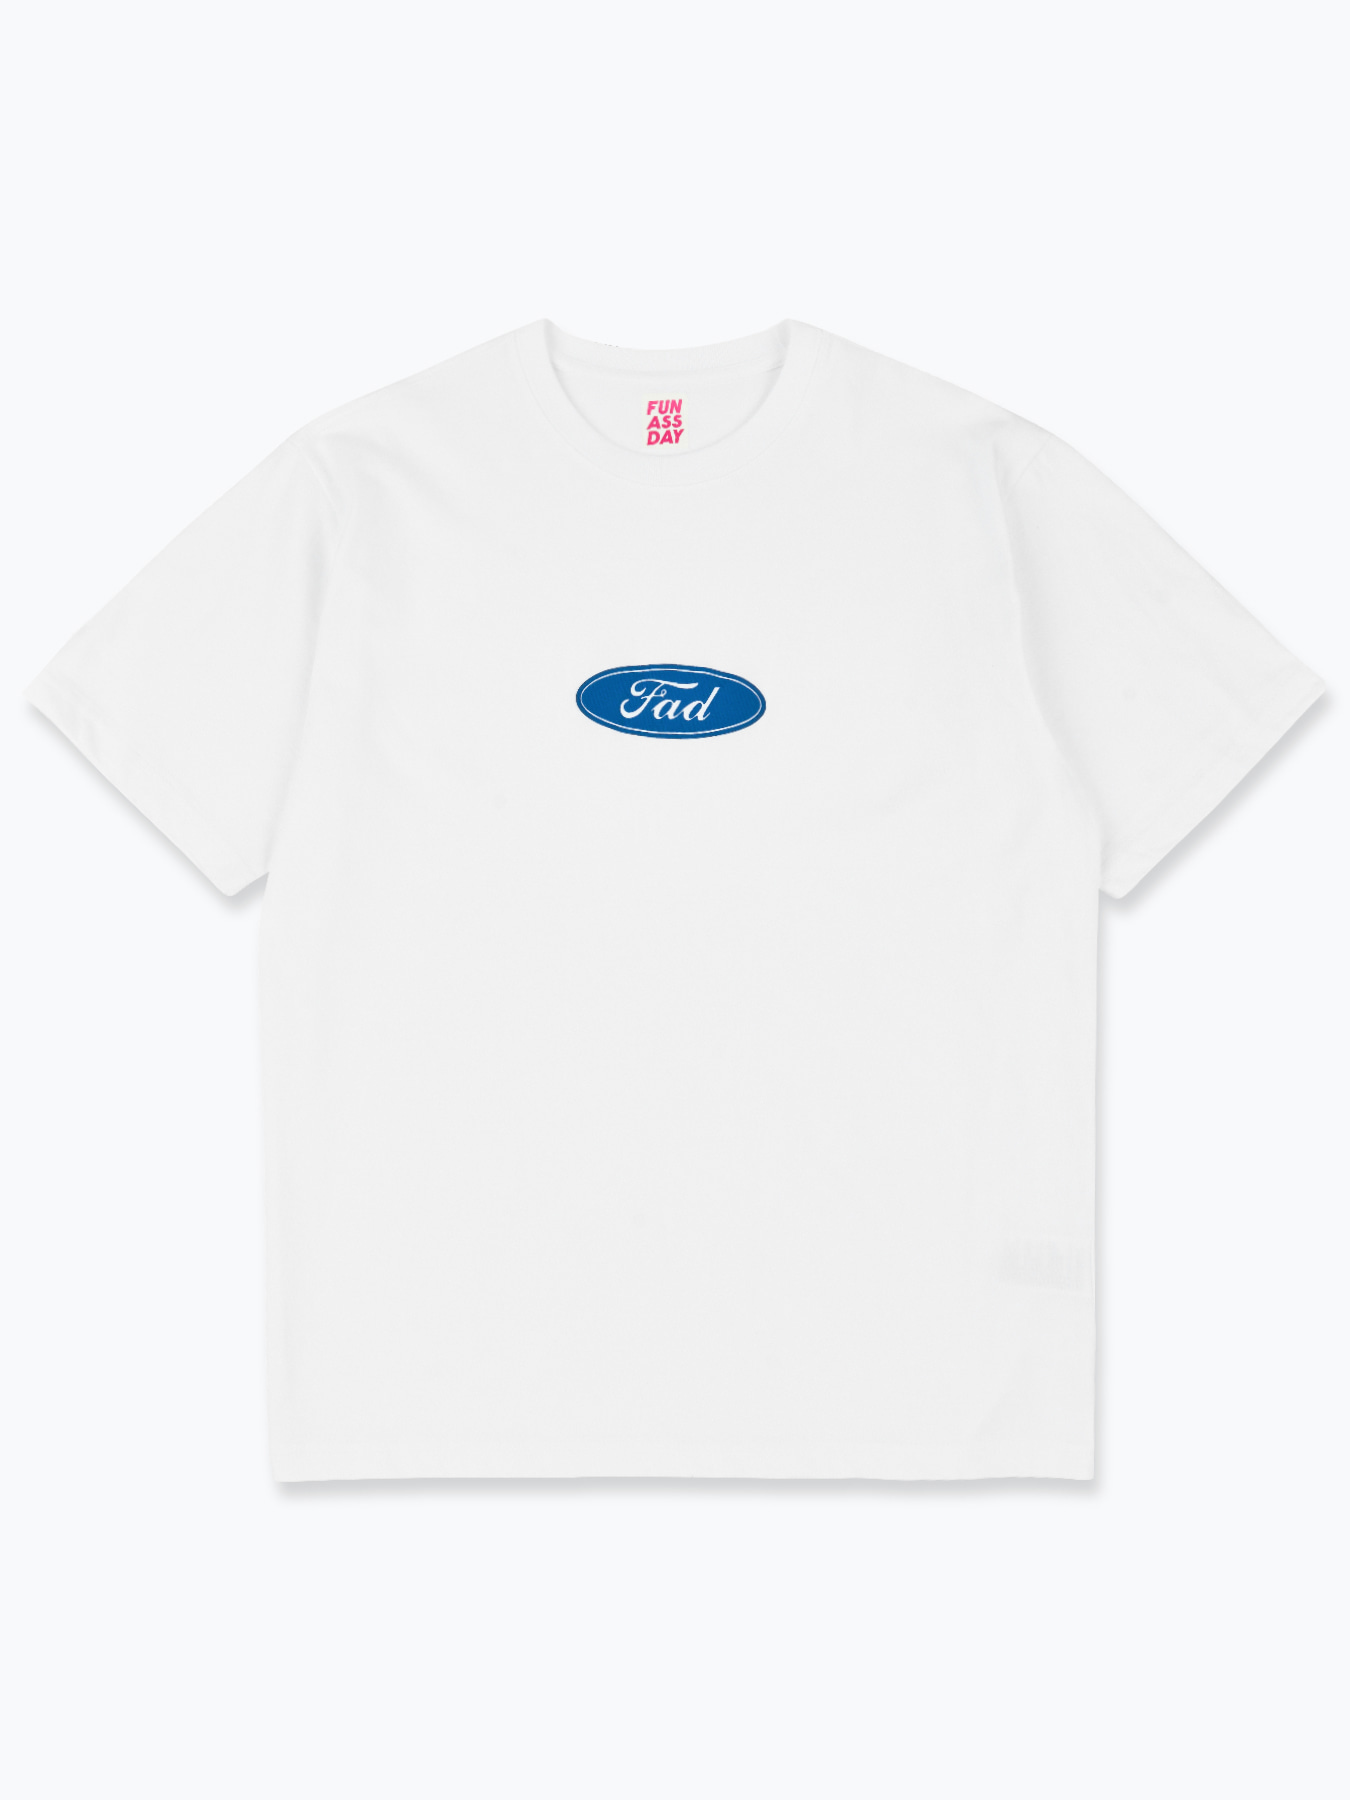 [FAD] FORD TEE (WHITE)